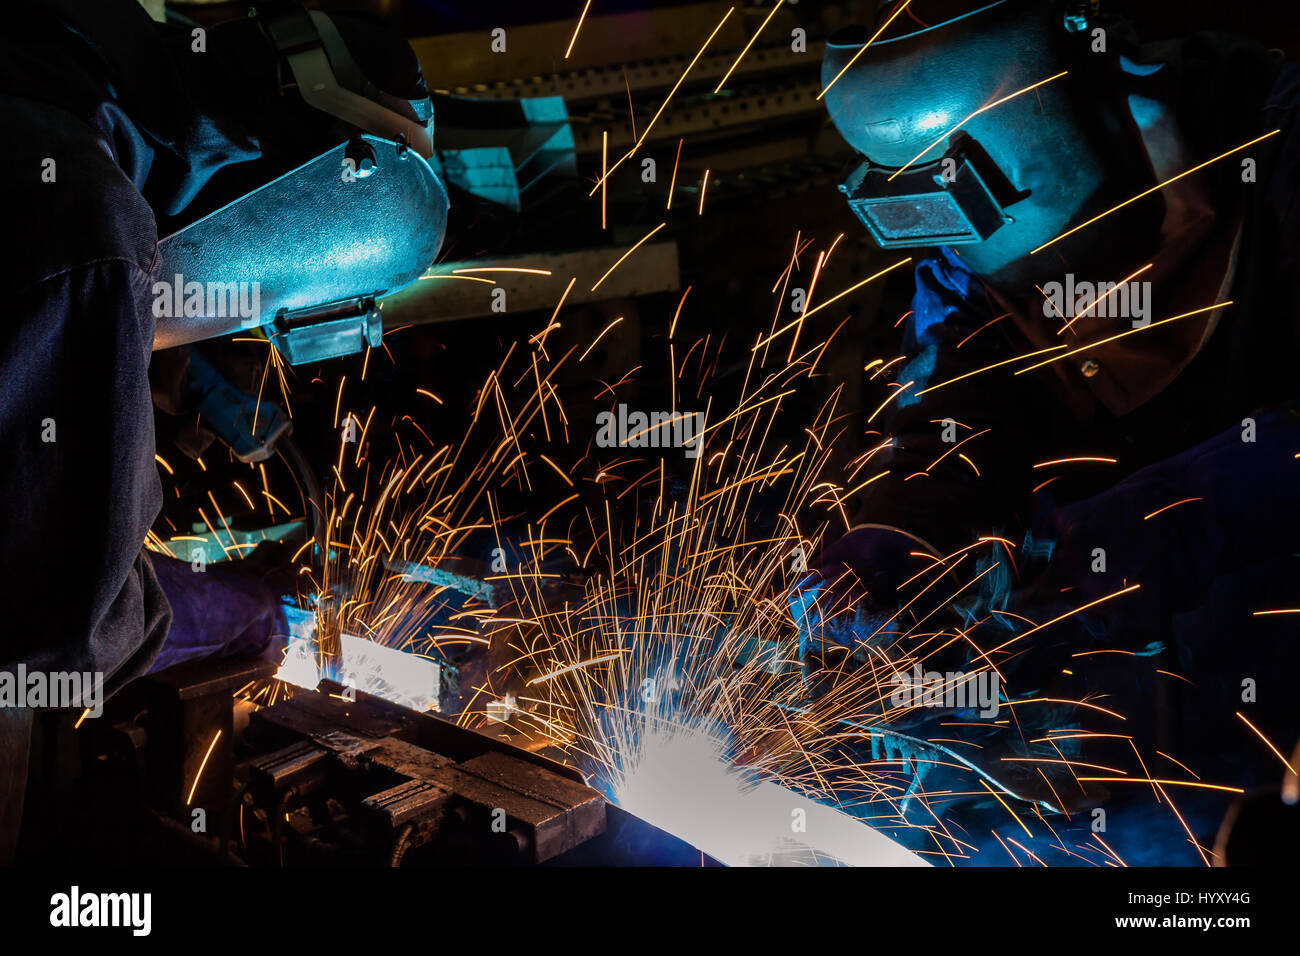 worker with protective mask welding metal in automotive assembly factory. Stock Photo